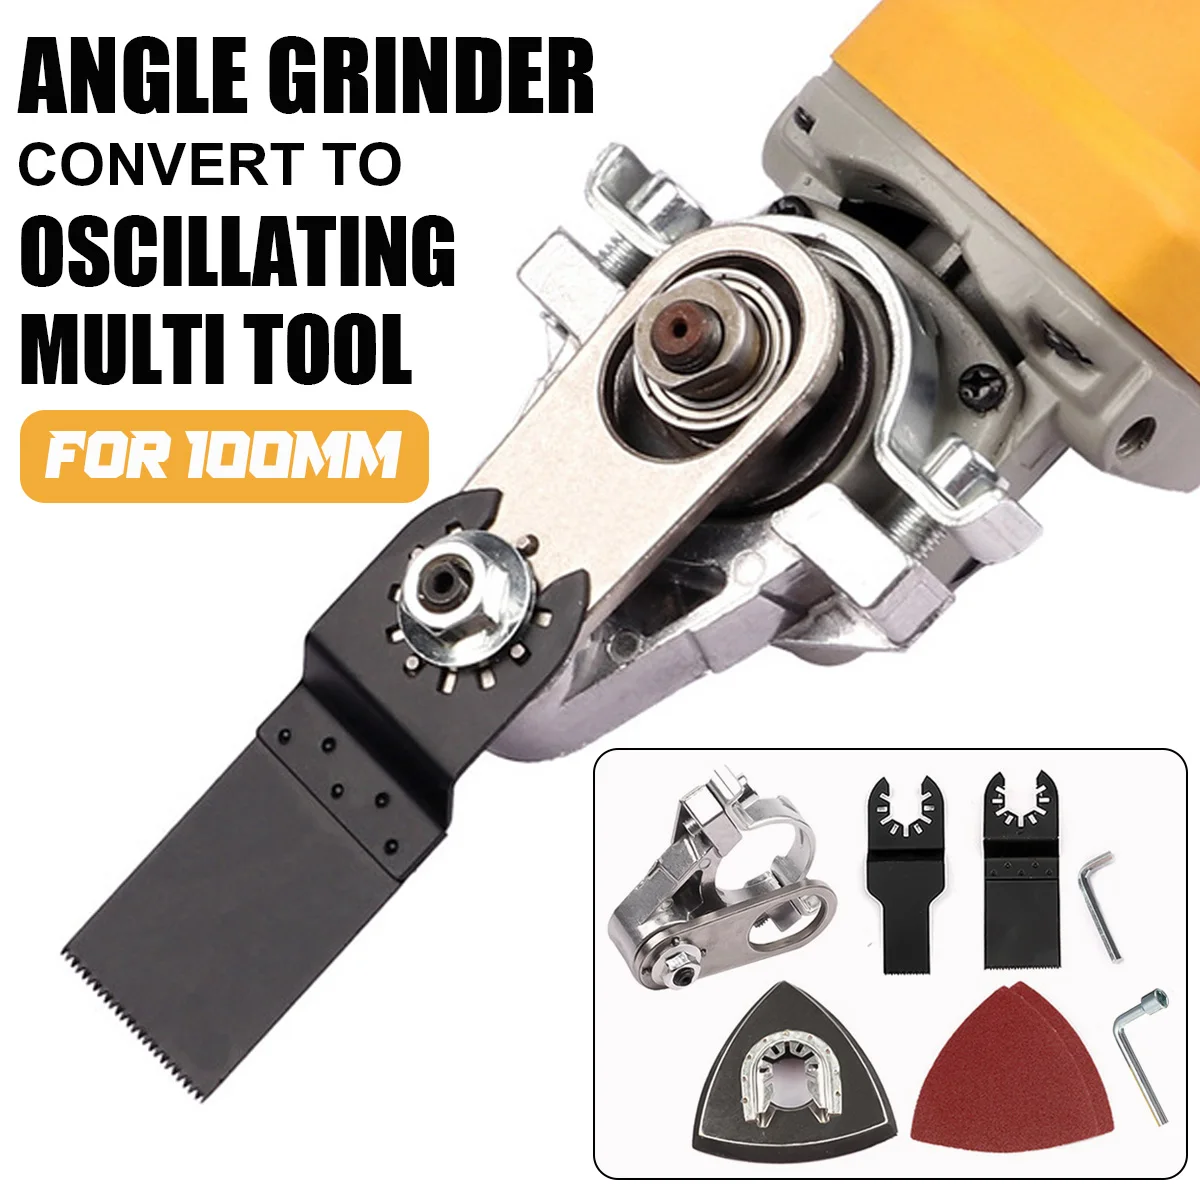 

Cordless Oscillating Multi Tool Angle grinder conversion tool head for 100mm Angle grinder